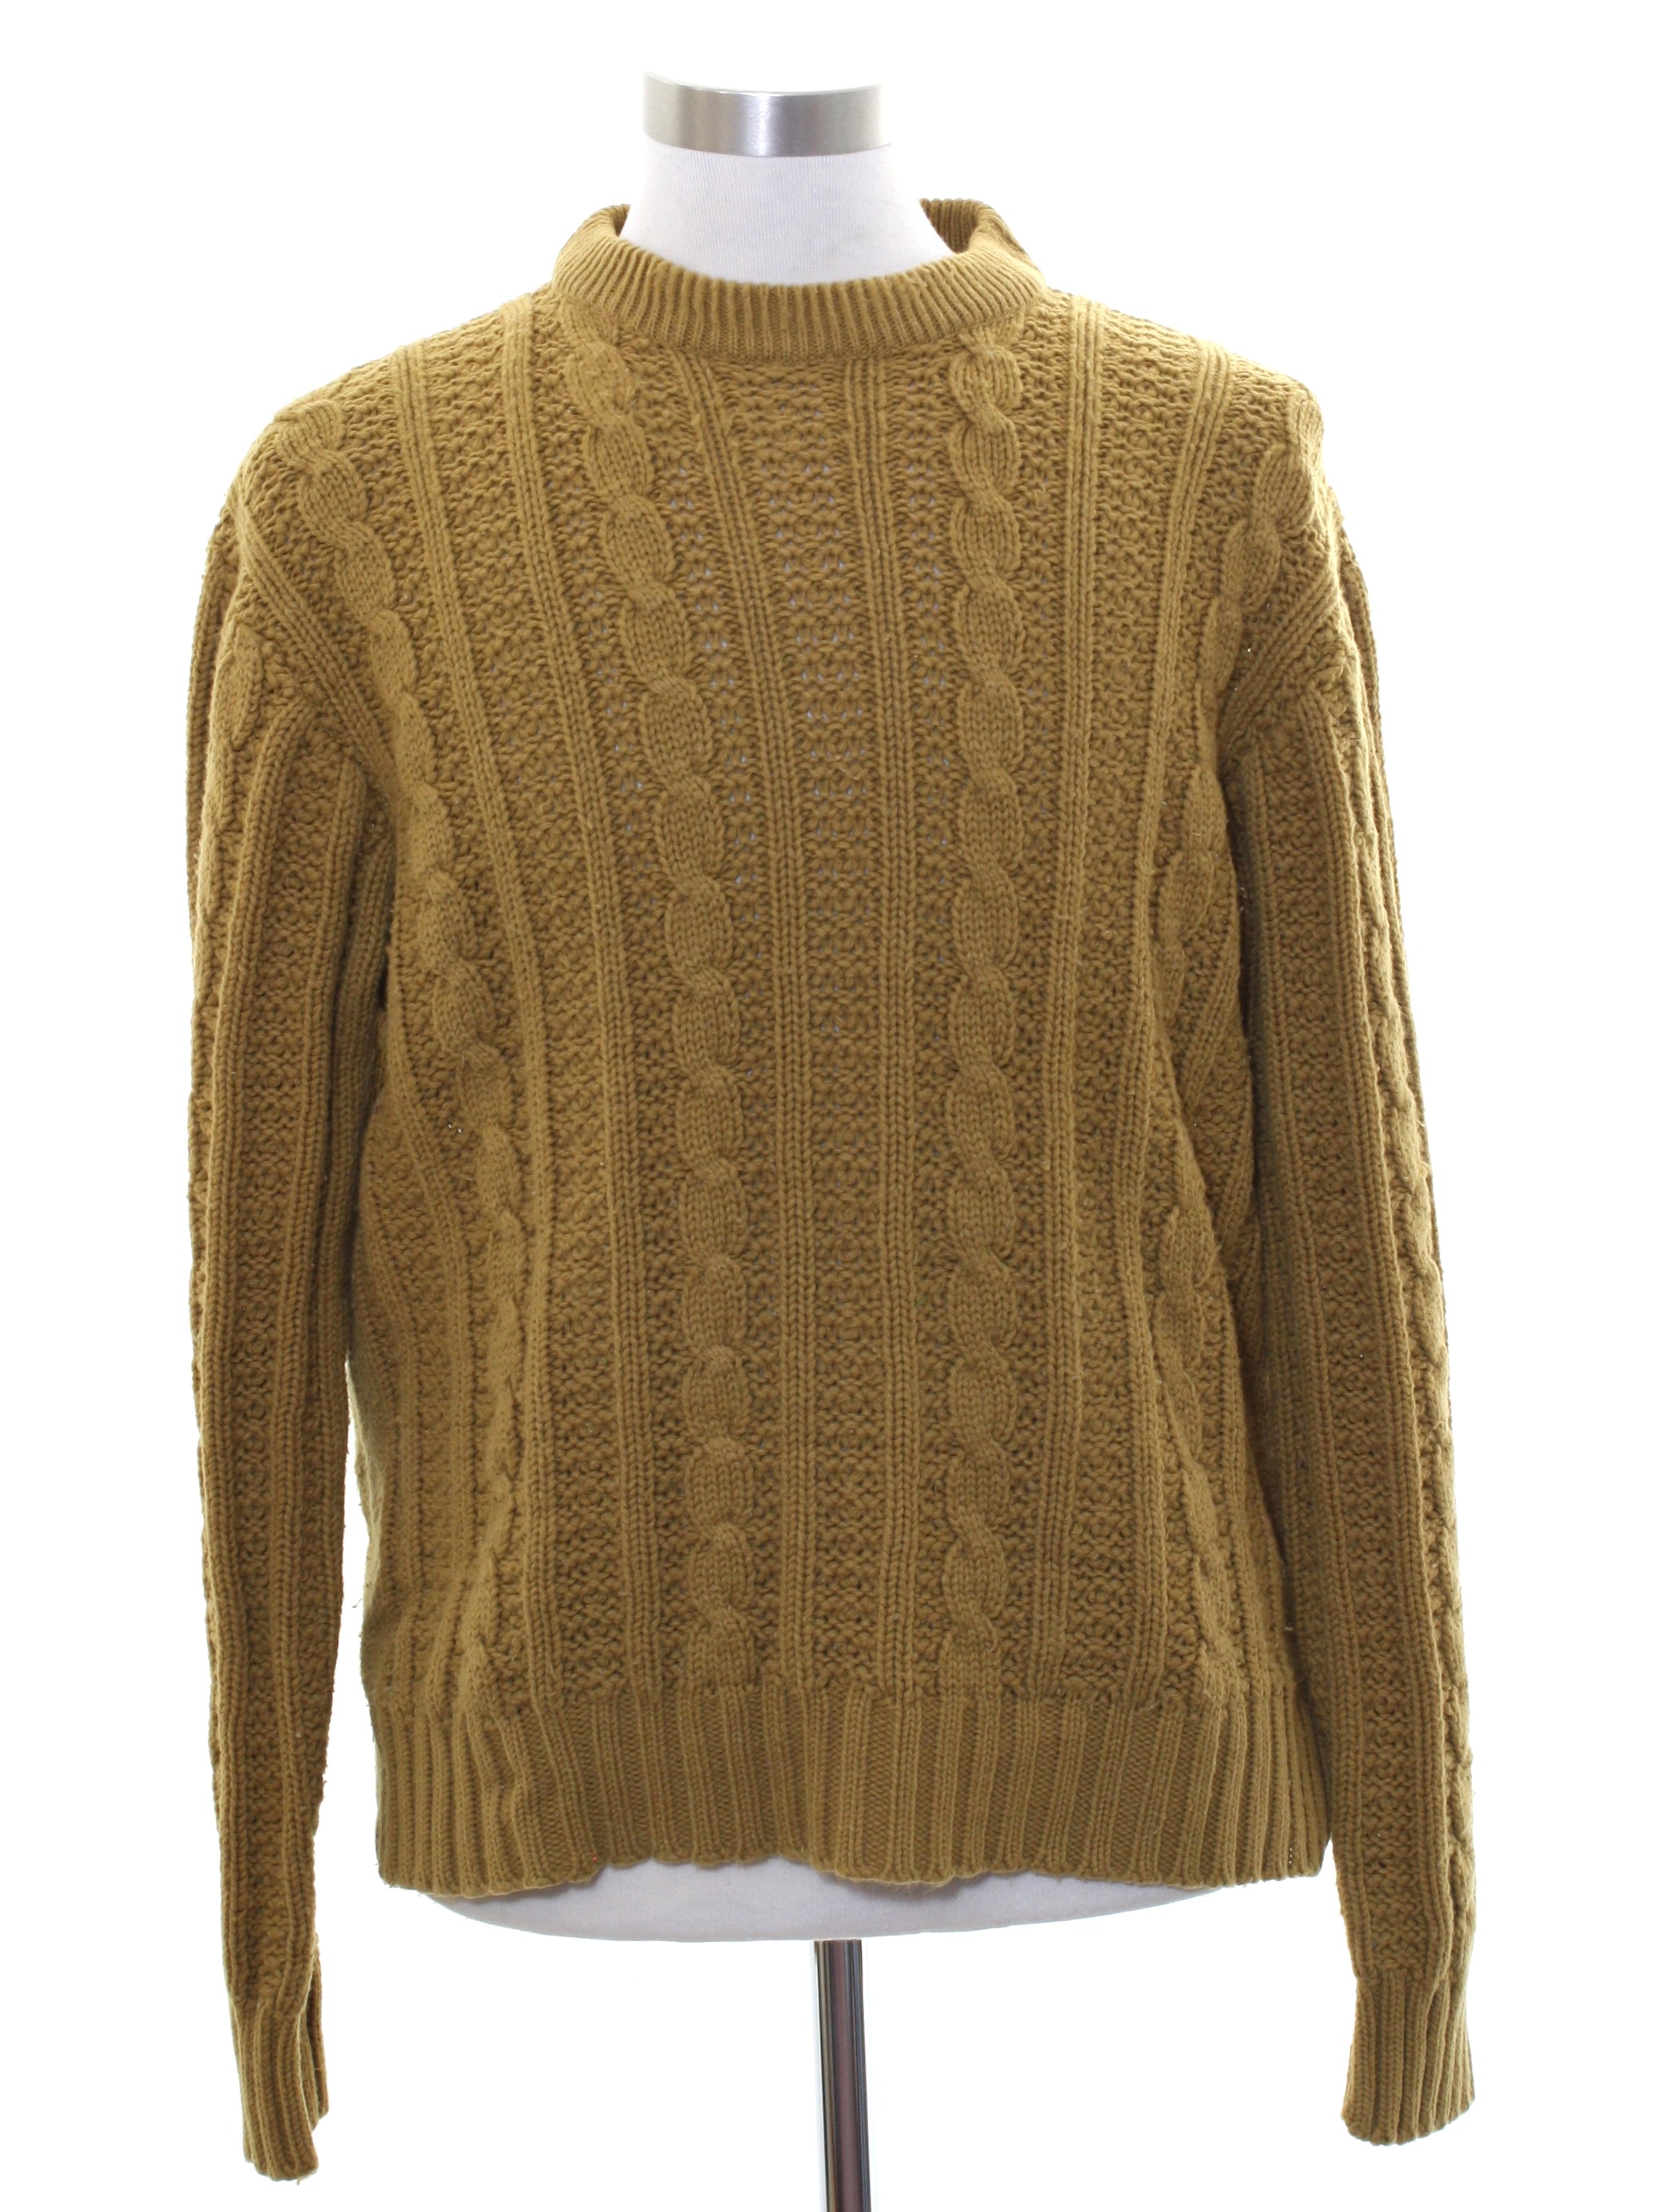 Retro Seventies Sweater: 70s -Repage- Mens gold acrylic cable knit ...